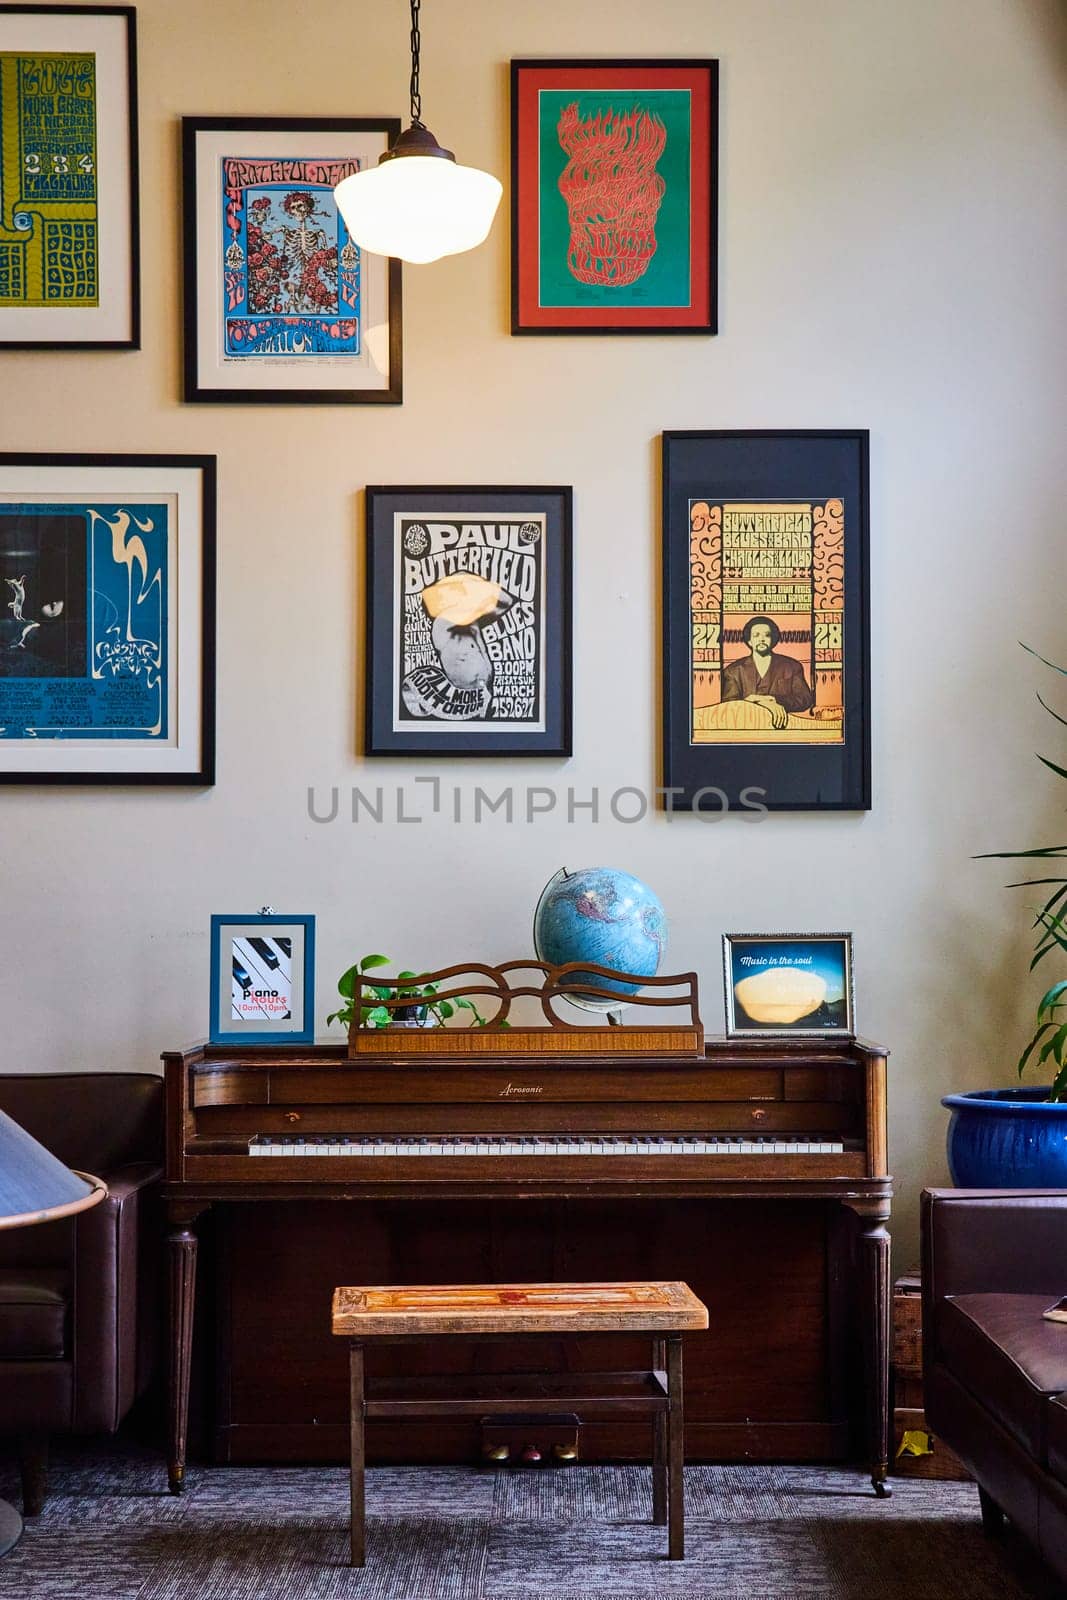 Image of Classic piano against white wall with old fashioned posters in Fort Mason